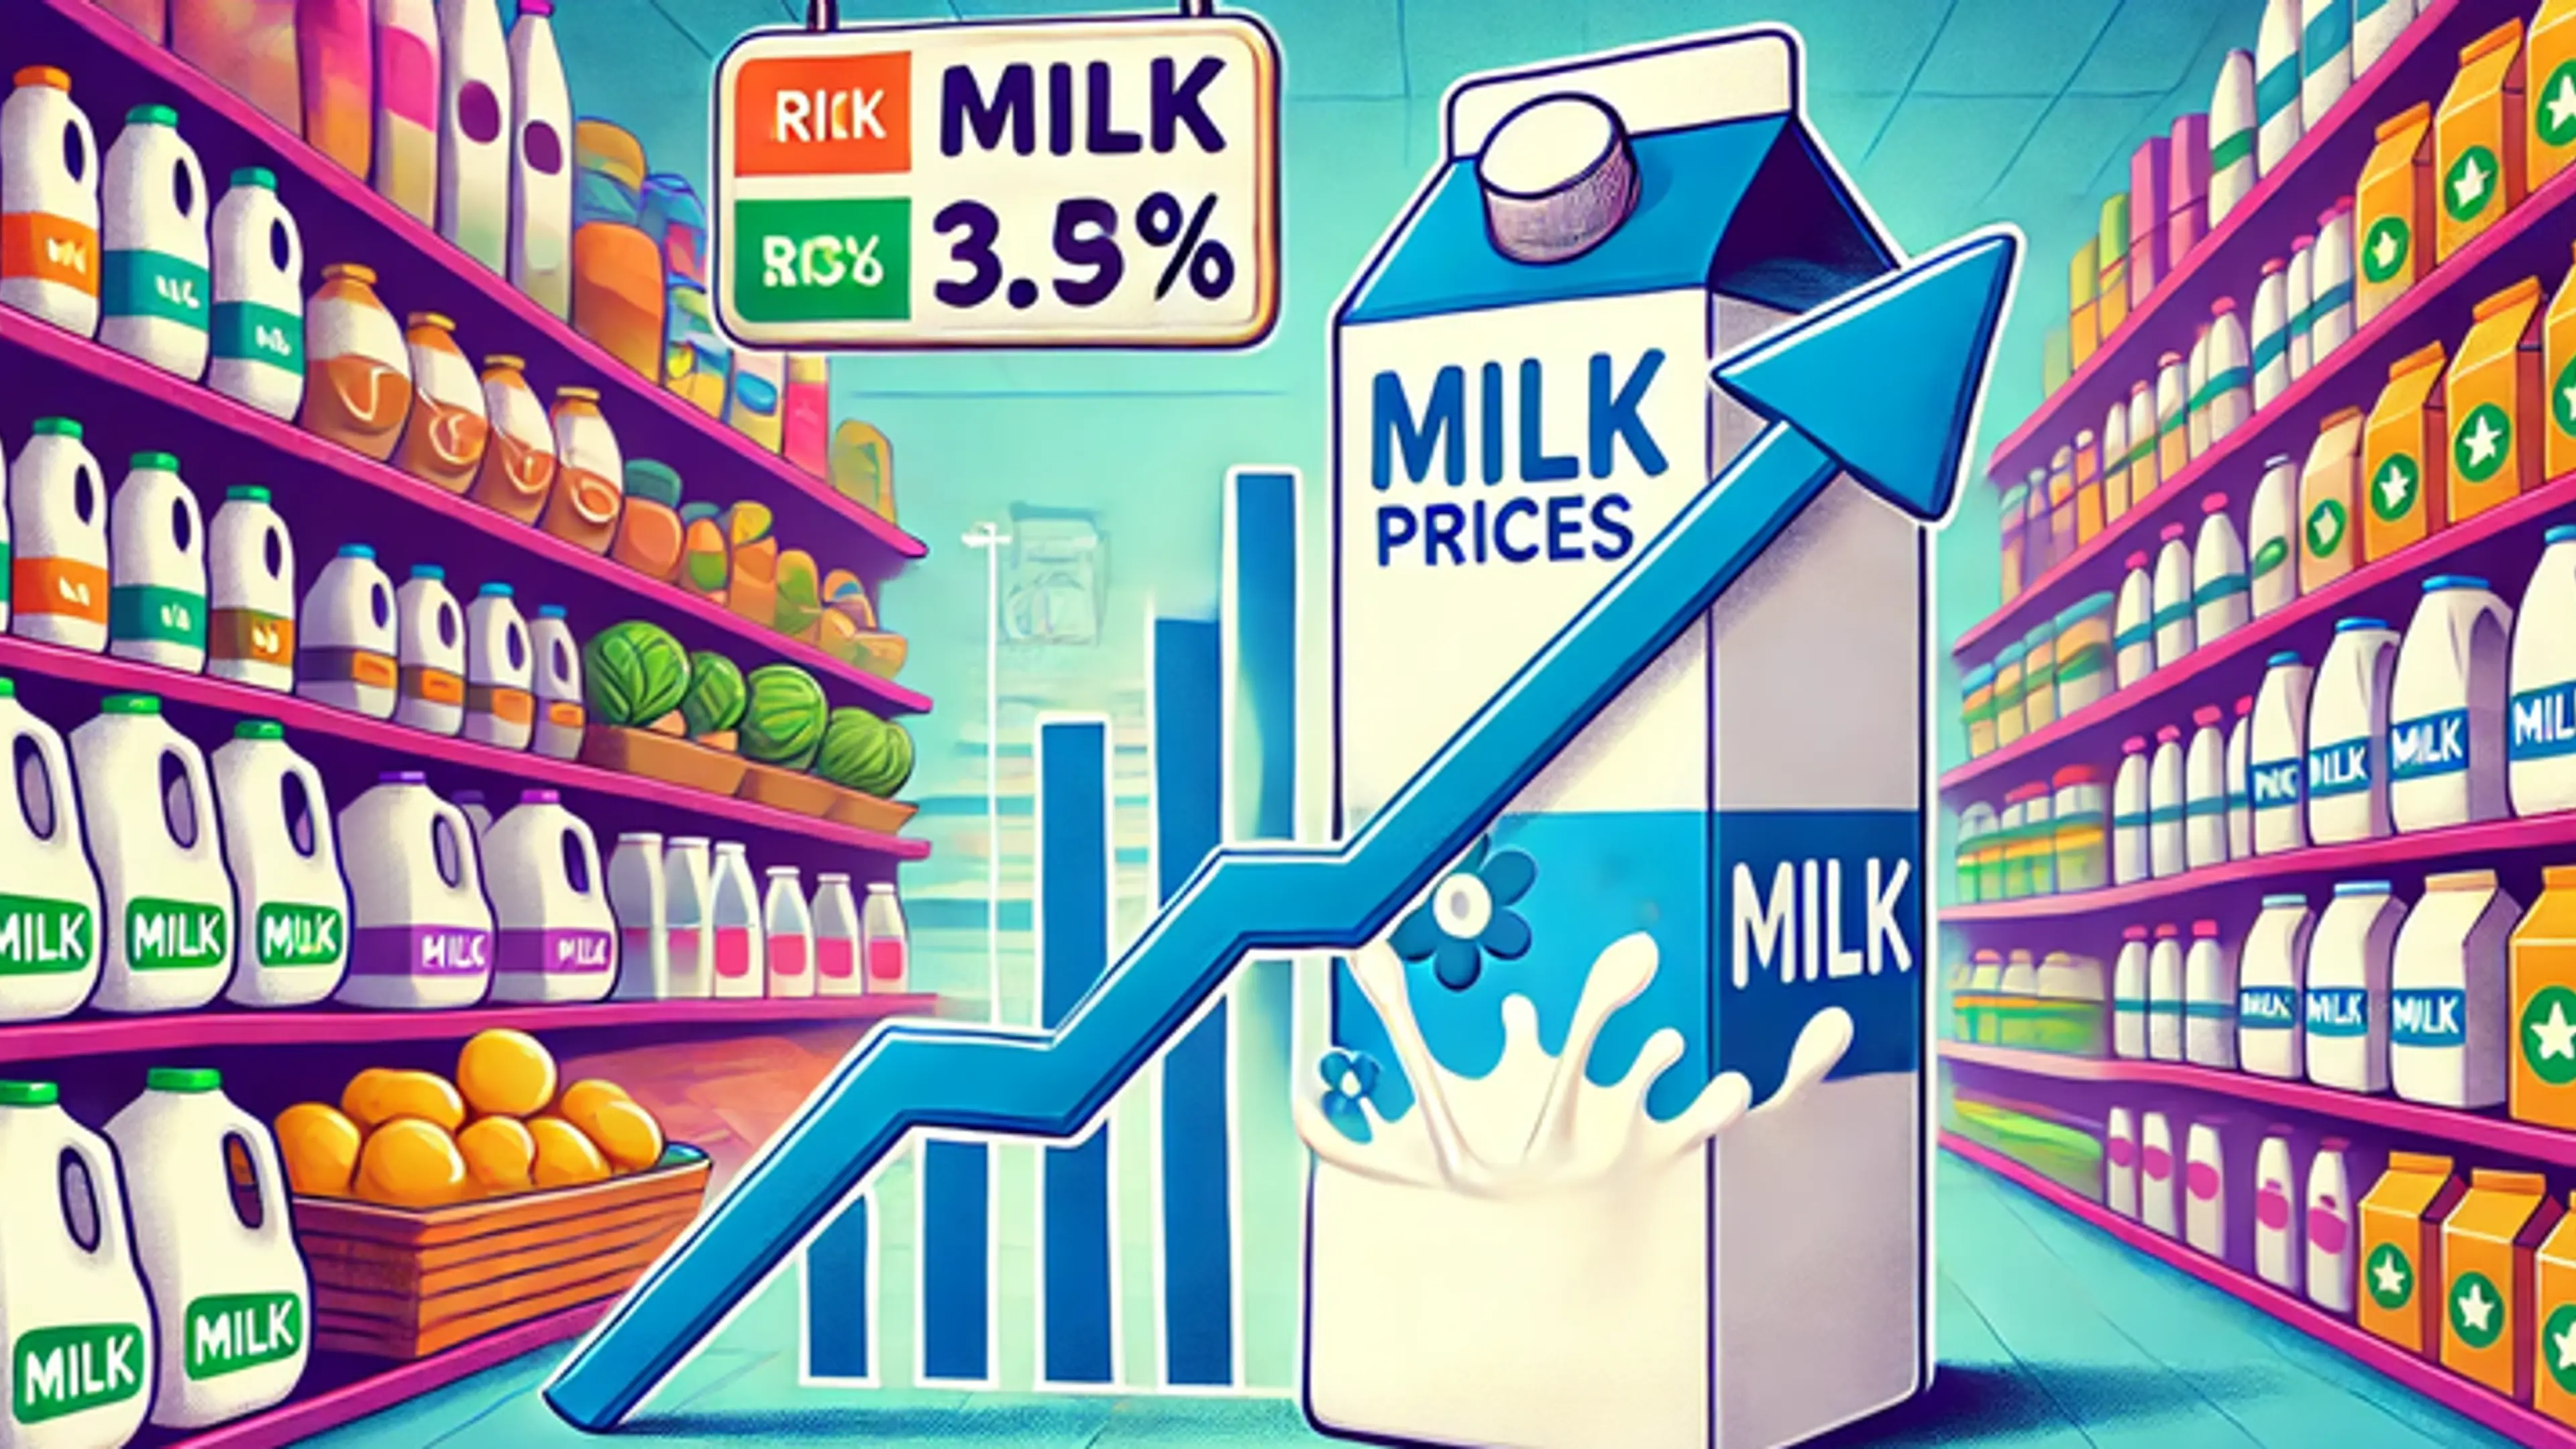 Why are Milk Prices Rising in India?